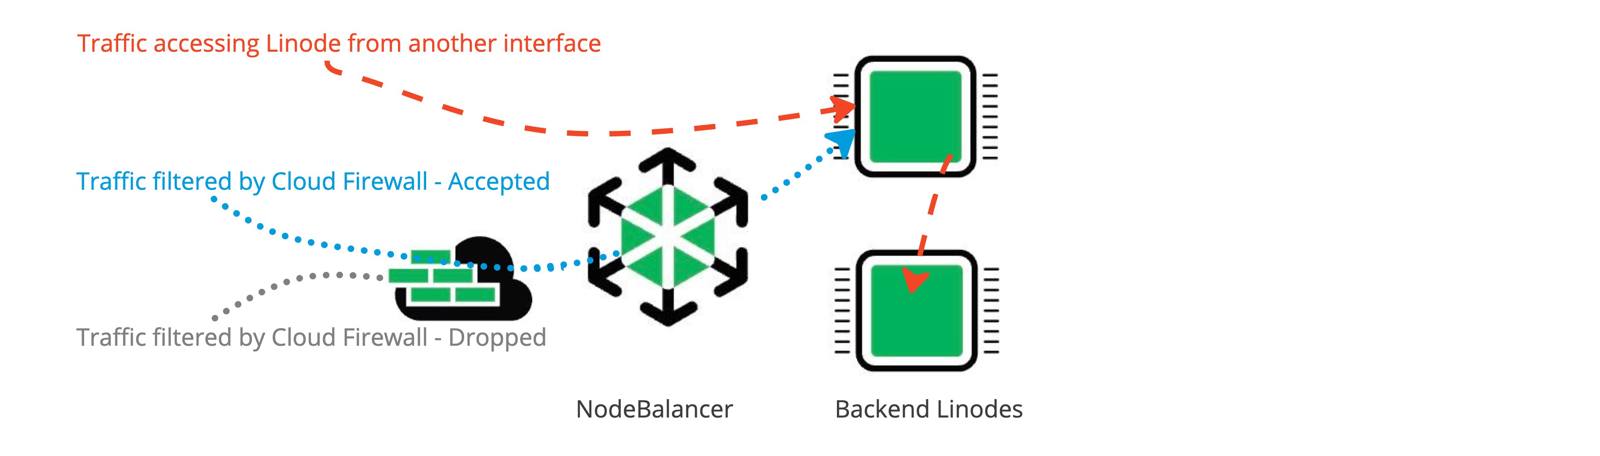 Figure of traffic going through firewall and NodeBalancer and traffic bypassing firewall and NodeBalancer